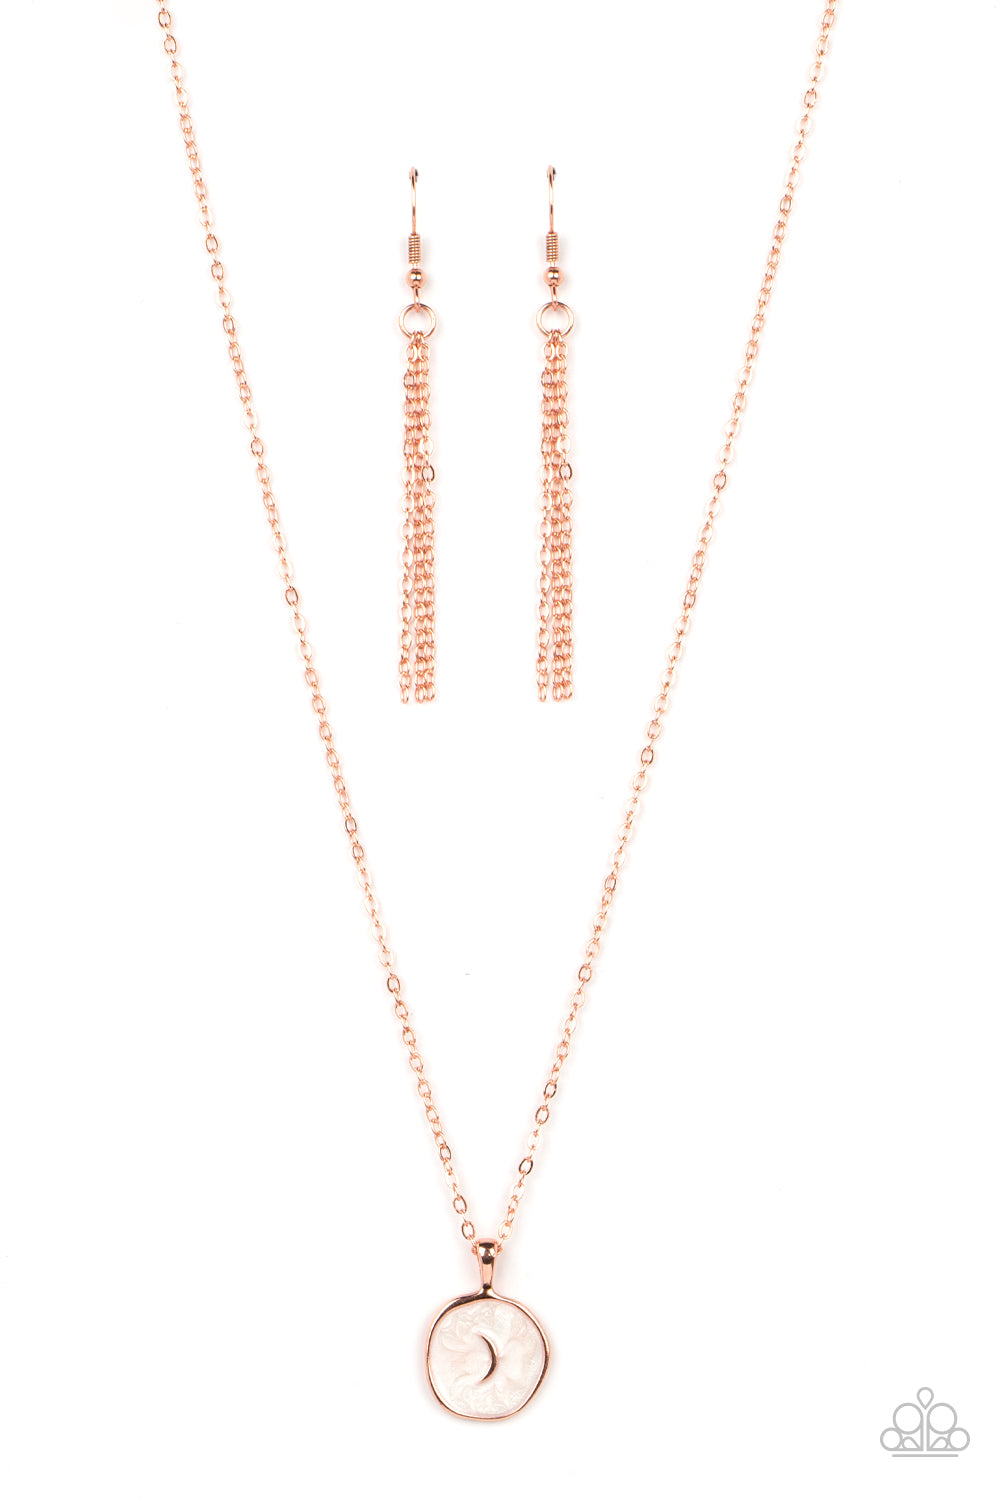 Moon Magic - Copper Dainty Moon/White Lacquer Finish Pendant Paparazzi Necklace & matching earrings